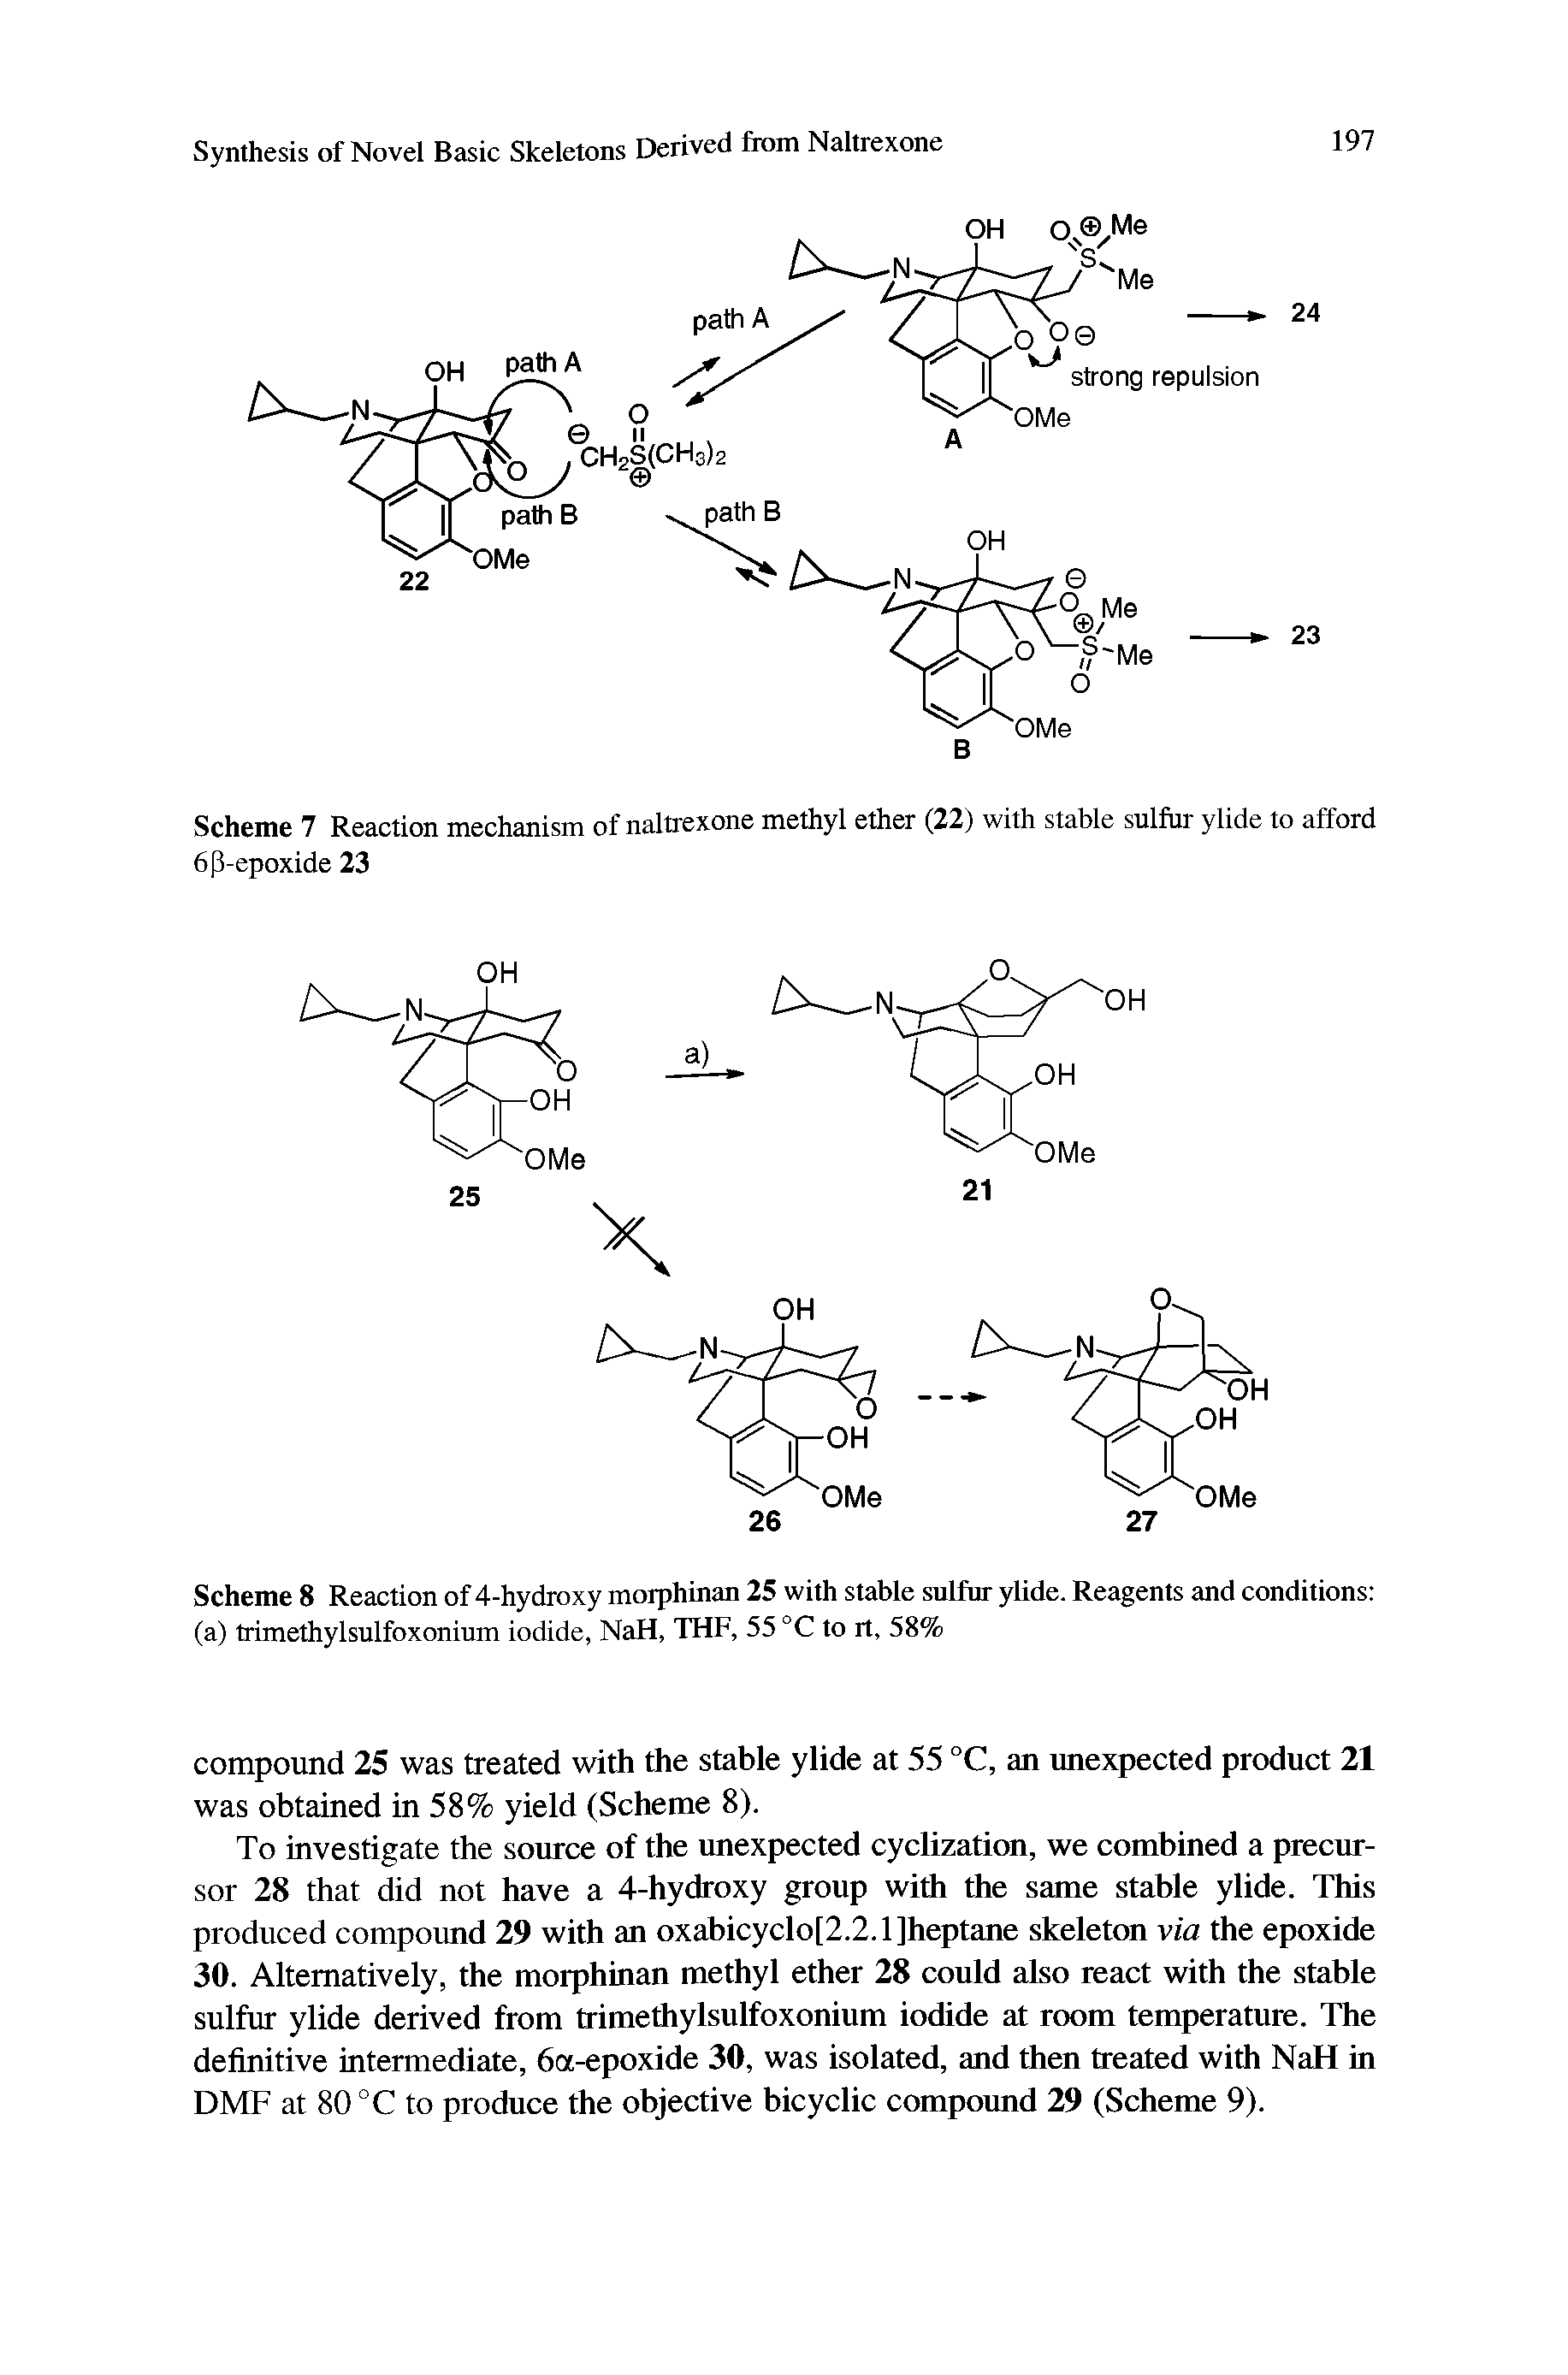 Scheme 8 Reaction of 4-hydroxy morphinan 25 with stable sulfur ylide. Reagents and conditions (a) trimethylsulfoxonium iodide, NaH, THF, 55 °C to rt, 58%...